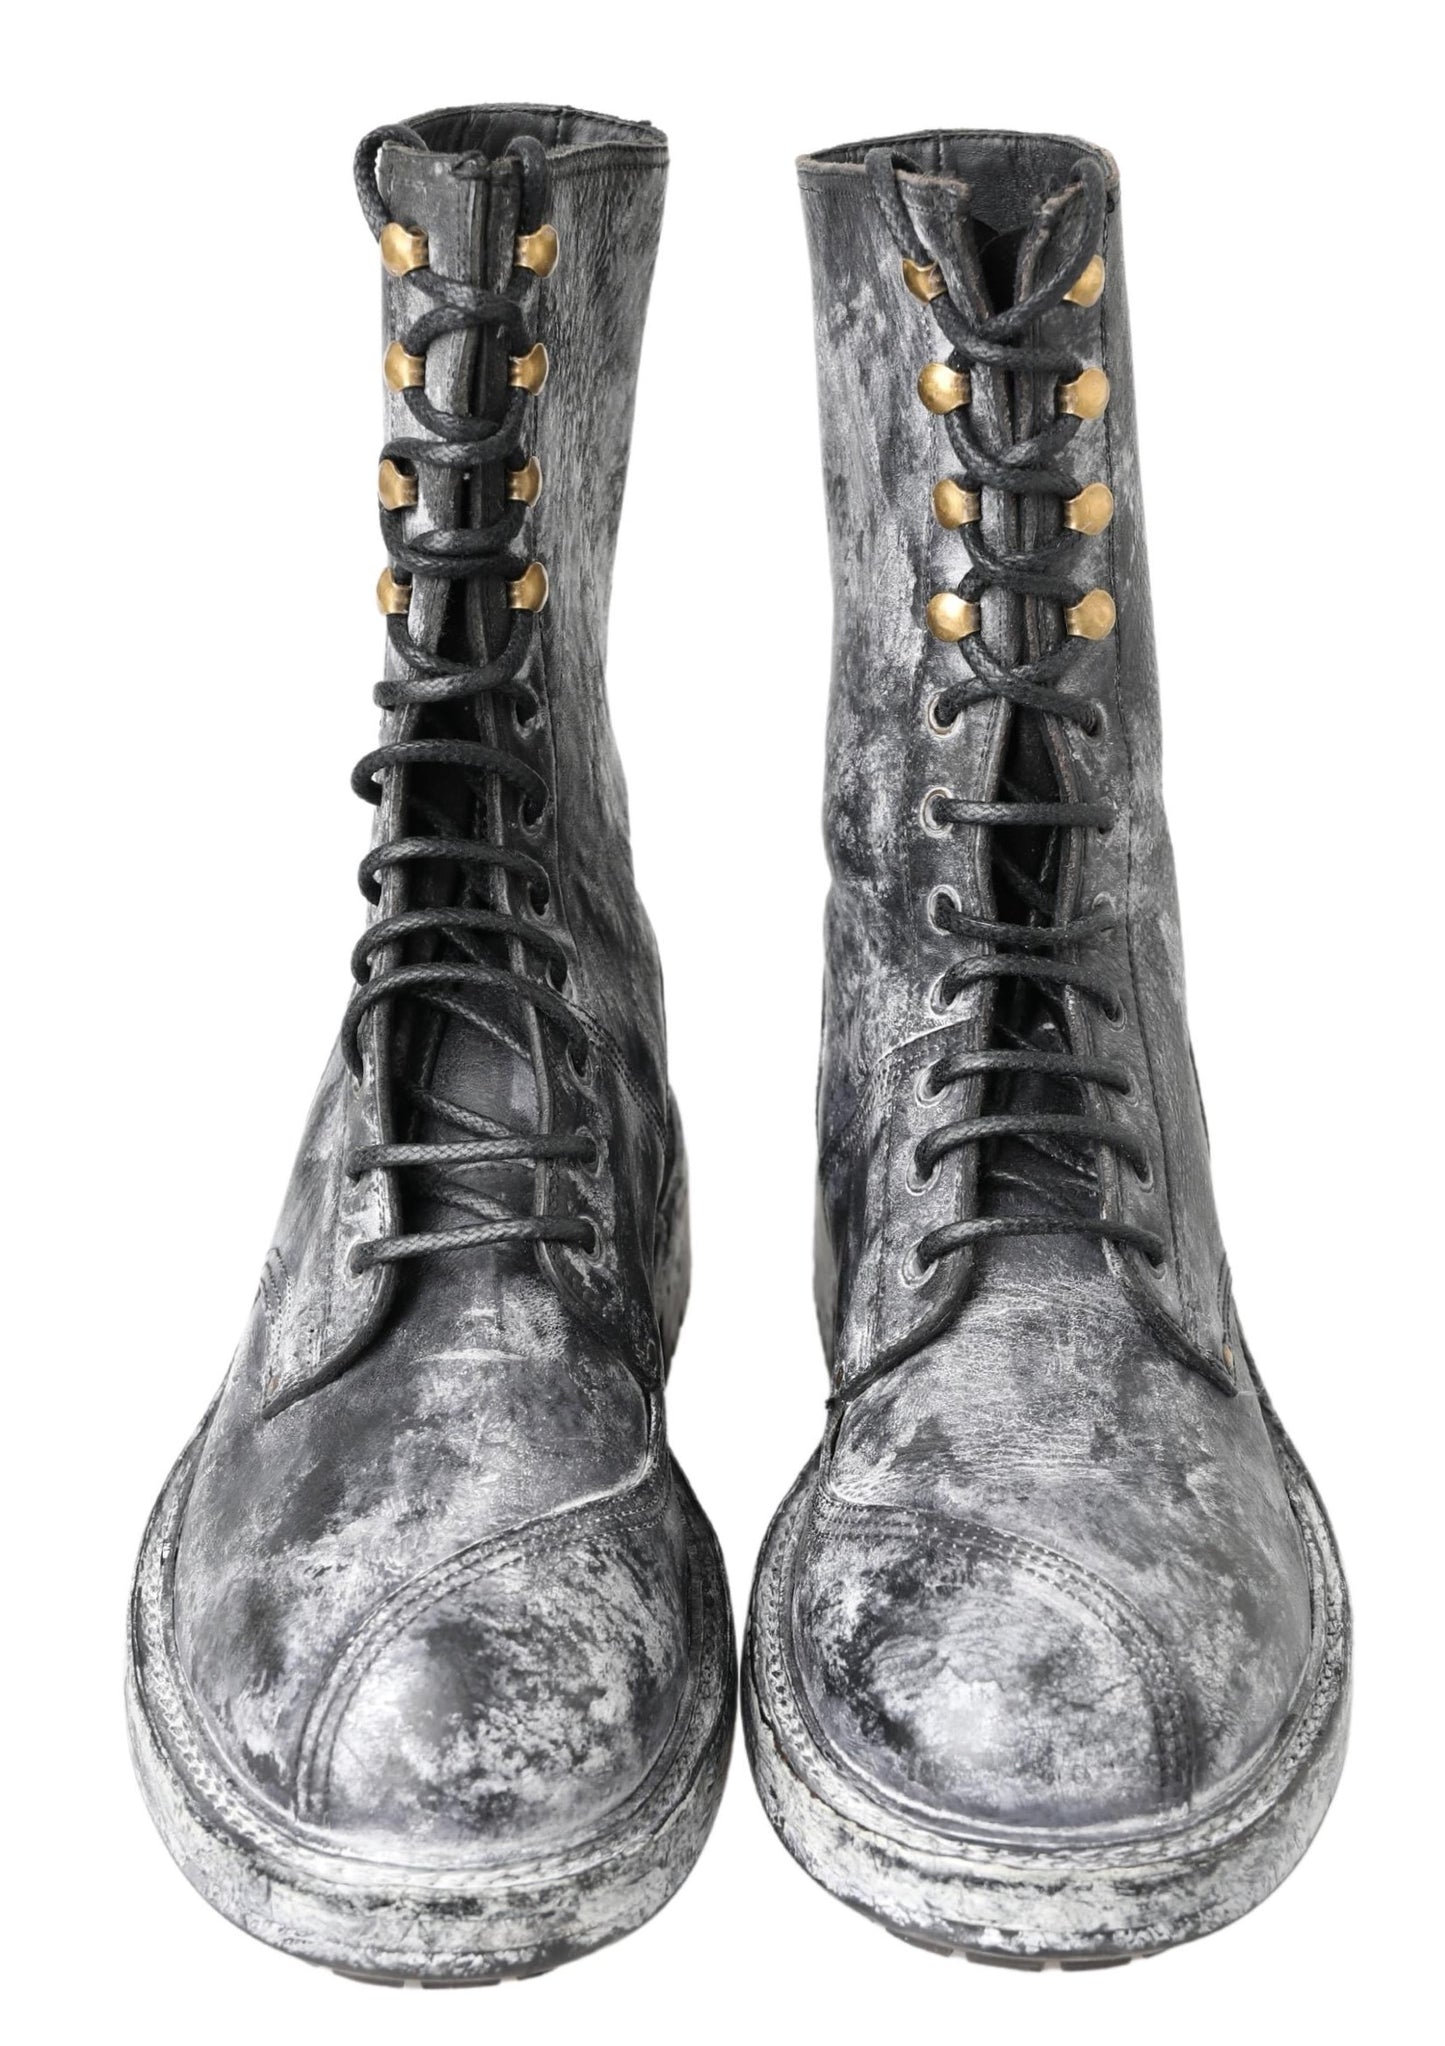 Chic Black Lace-Up Boots with Gray White Fade